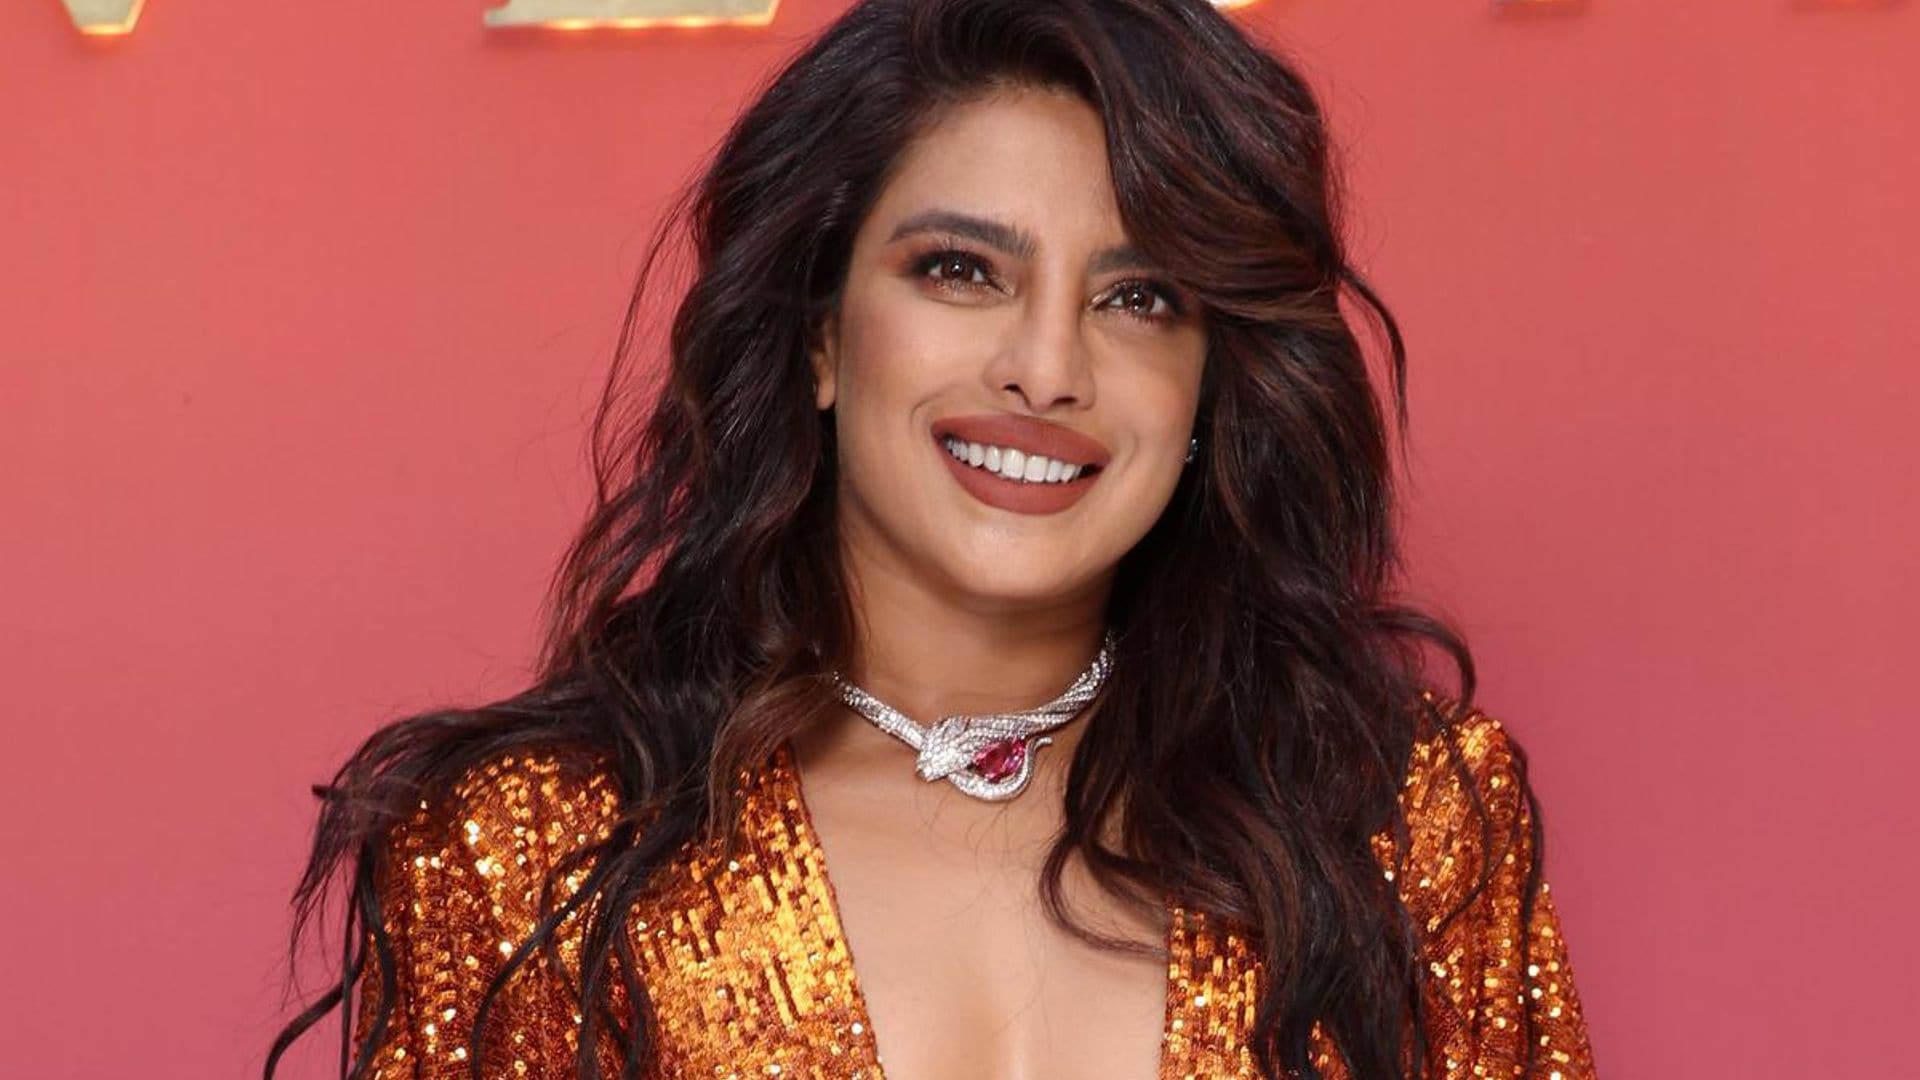 Priyanka Chopra says ‘There is nothing more powerful than a mother’s instinct to protect her own’